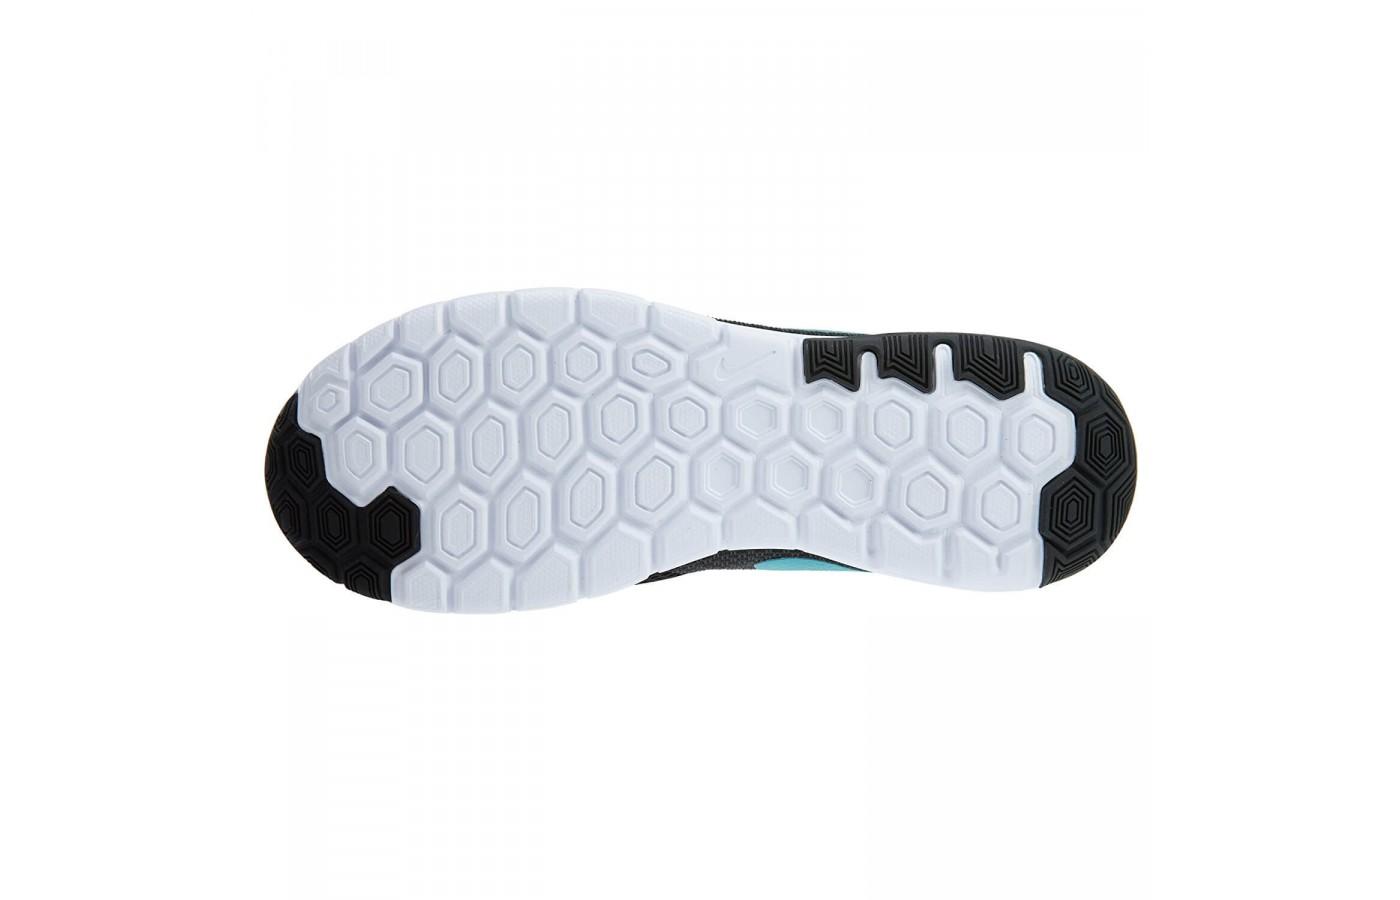 The outsole of the Nike Flex Experience RN 6 is durable and the hexagonal lugs provide a natural ride